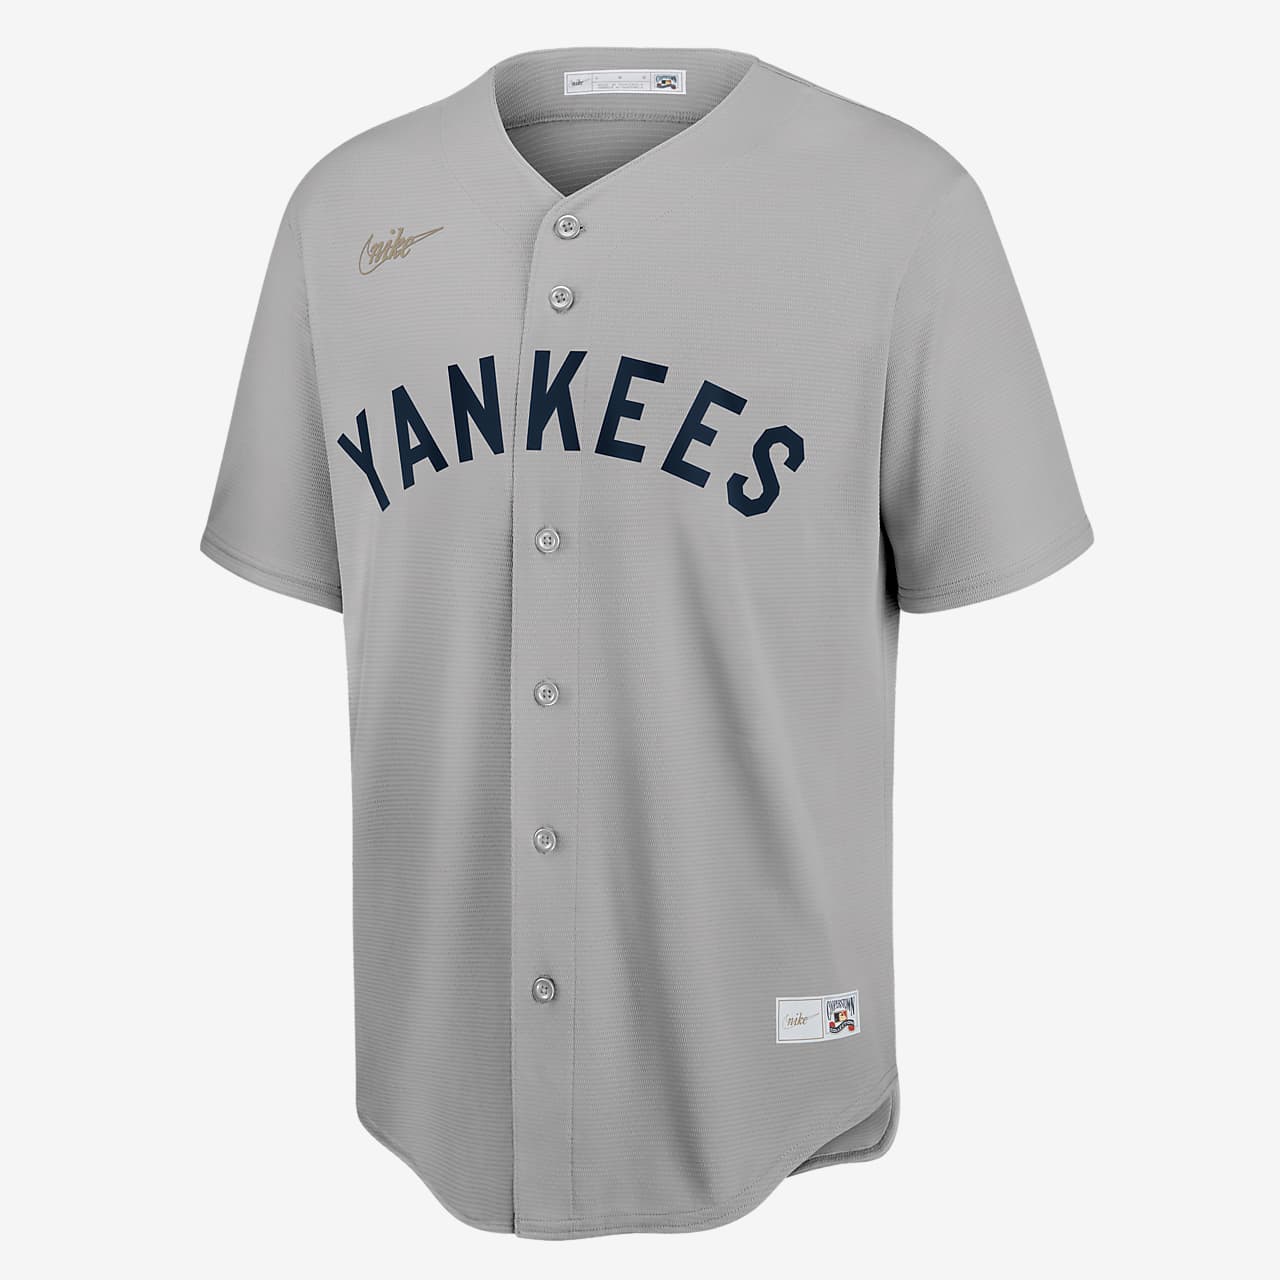 yankees baseball jersey for sale